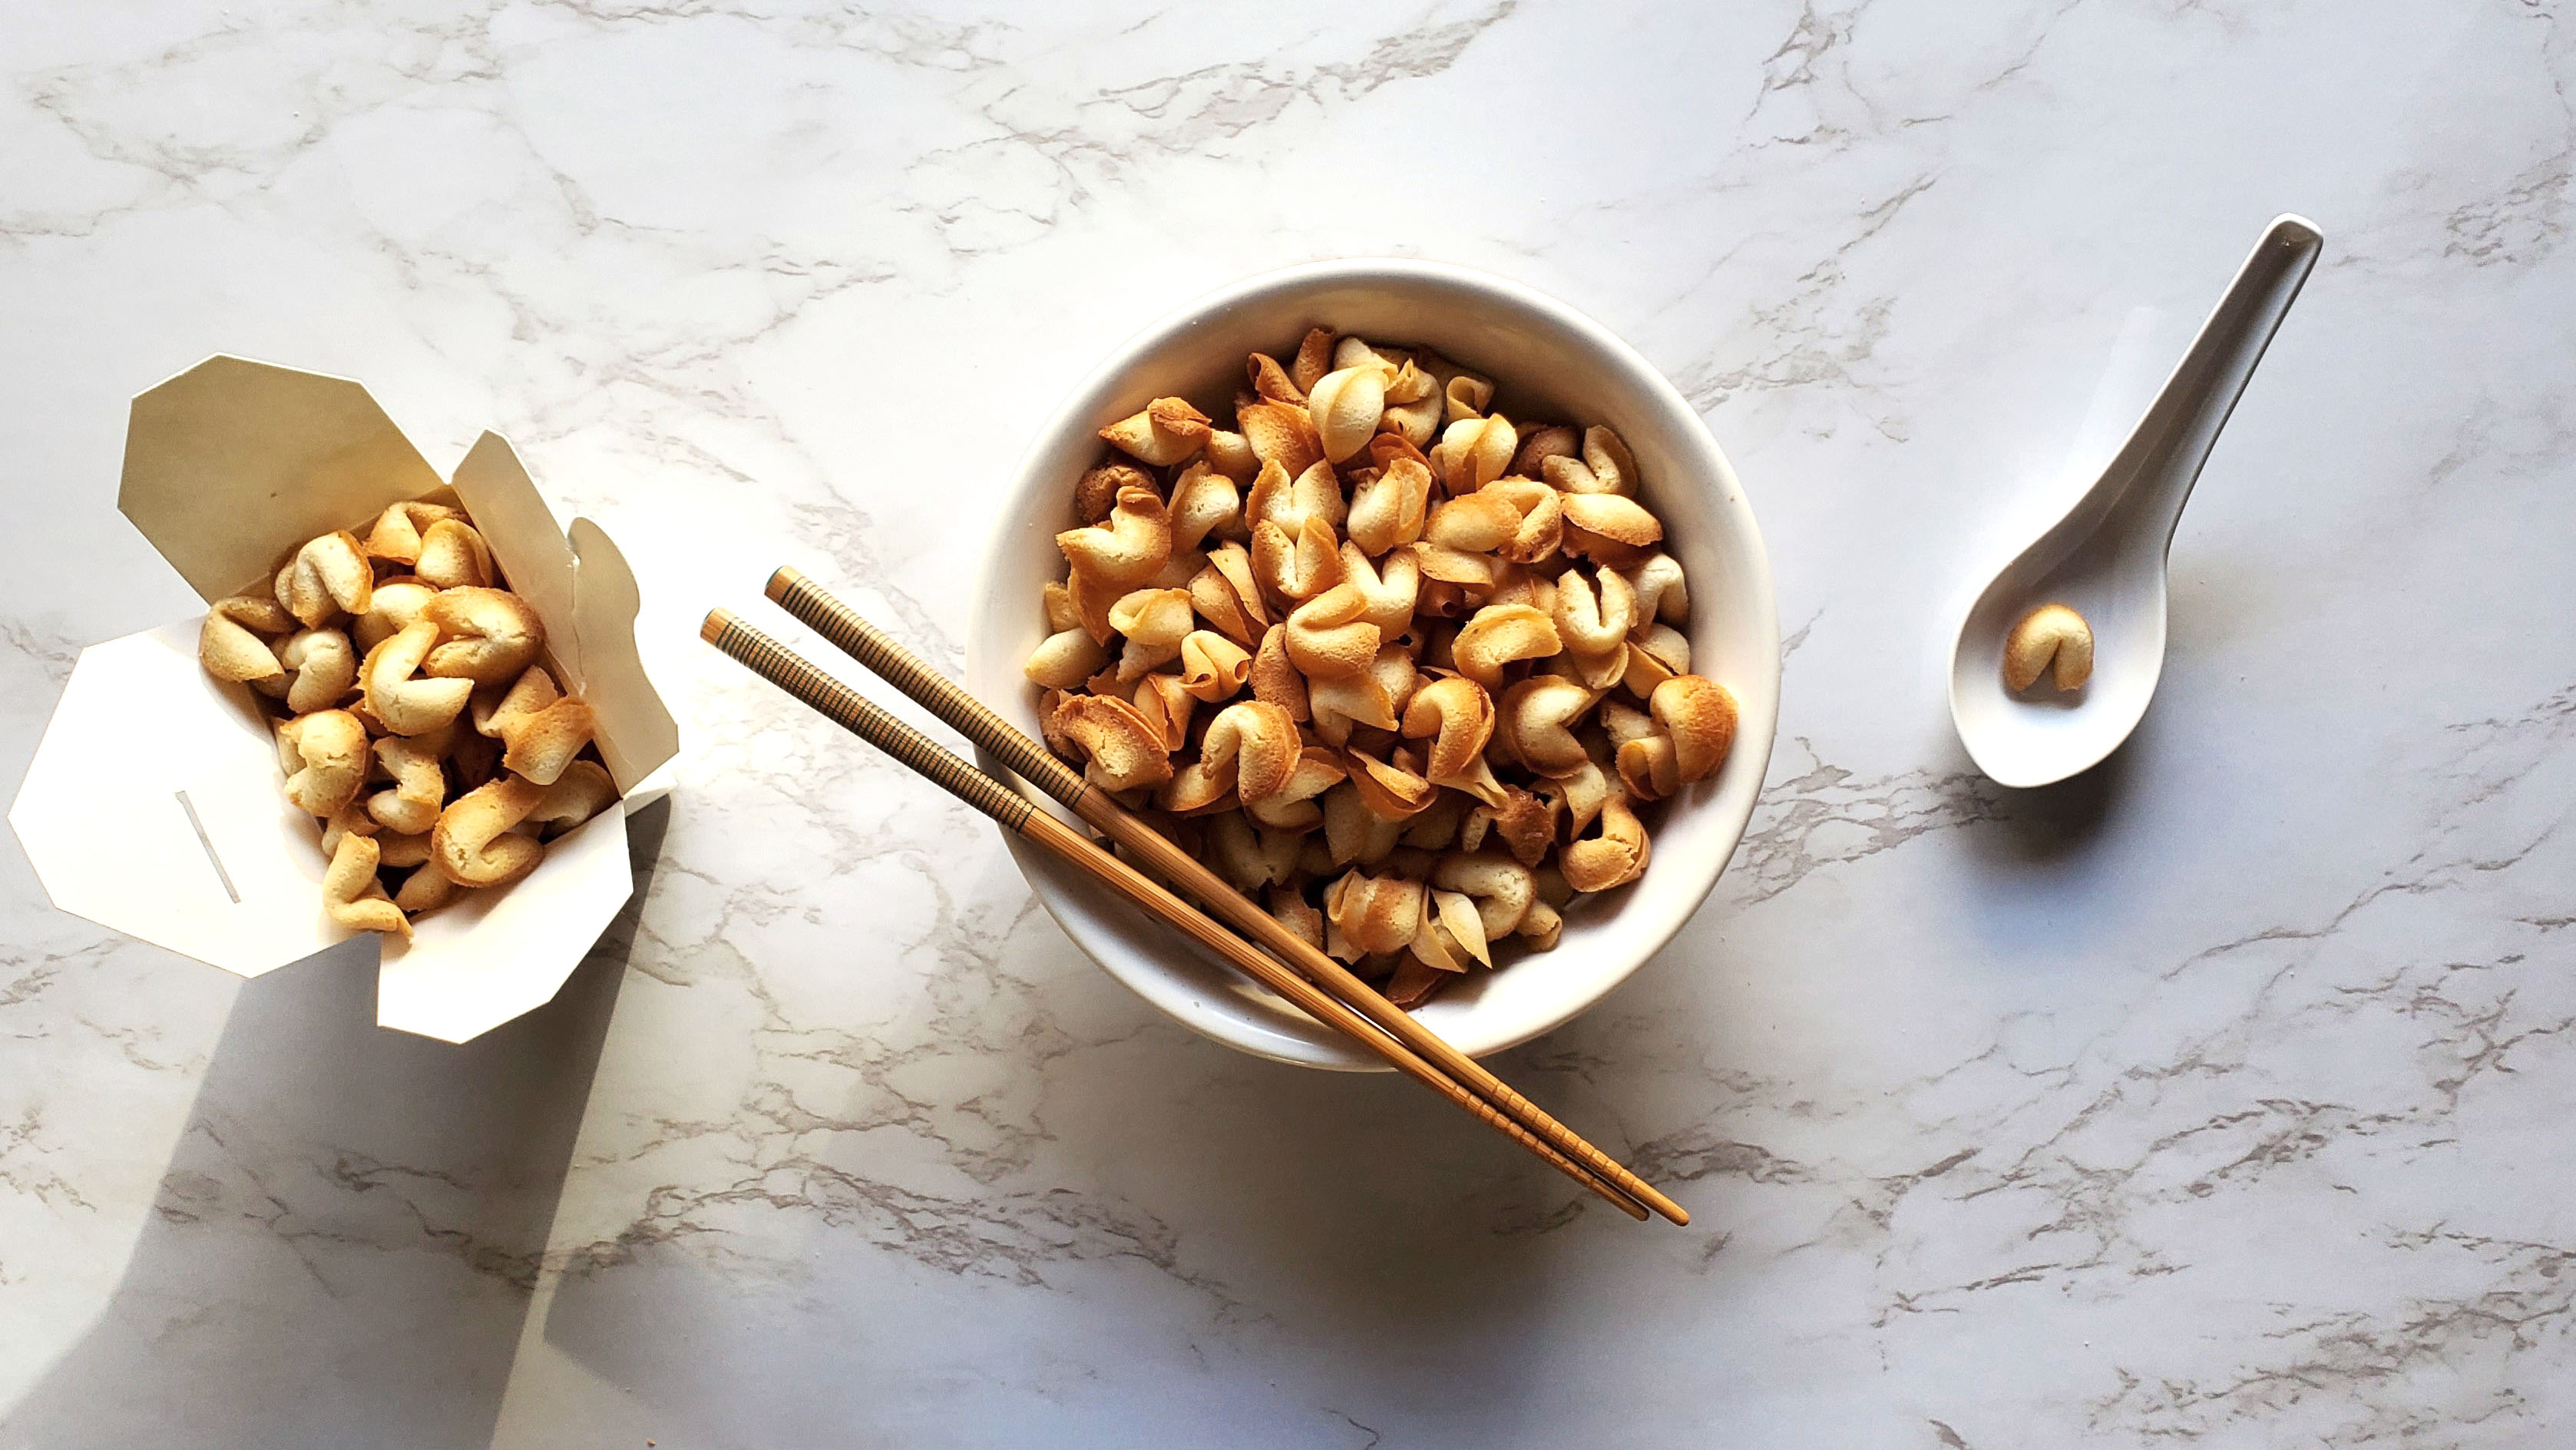 There is a white bowl full of "fortune cookie cereal". Resting on the bowl is a pair of chopsticks with a green lined pattern that wraps around the top third. In the upper left there is a small Chinese takeout box filled to the brim with fortune cookie cereal. All on a white marble countertop.